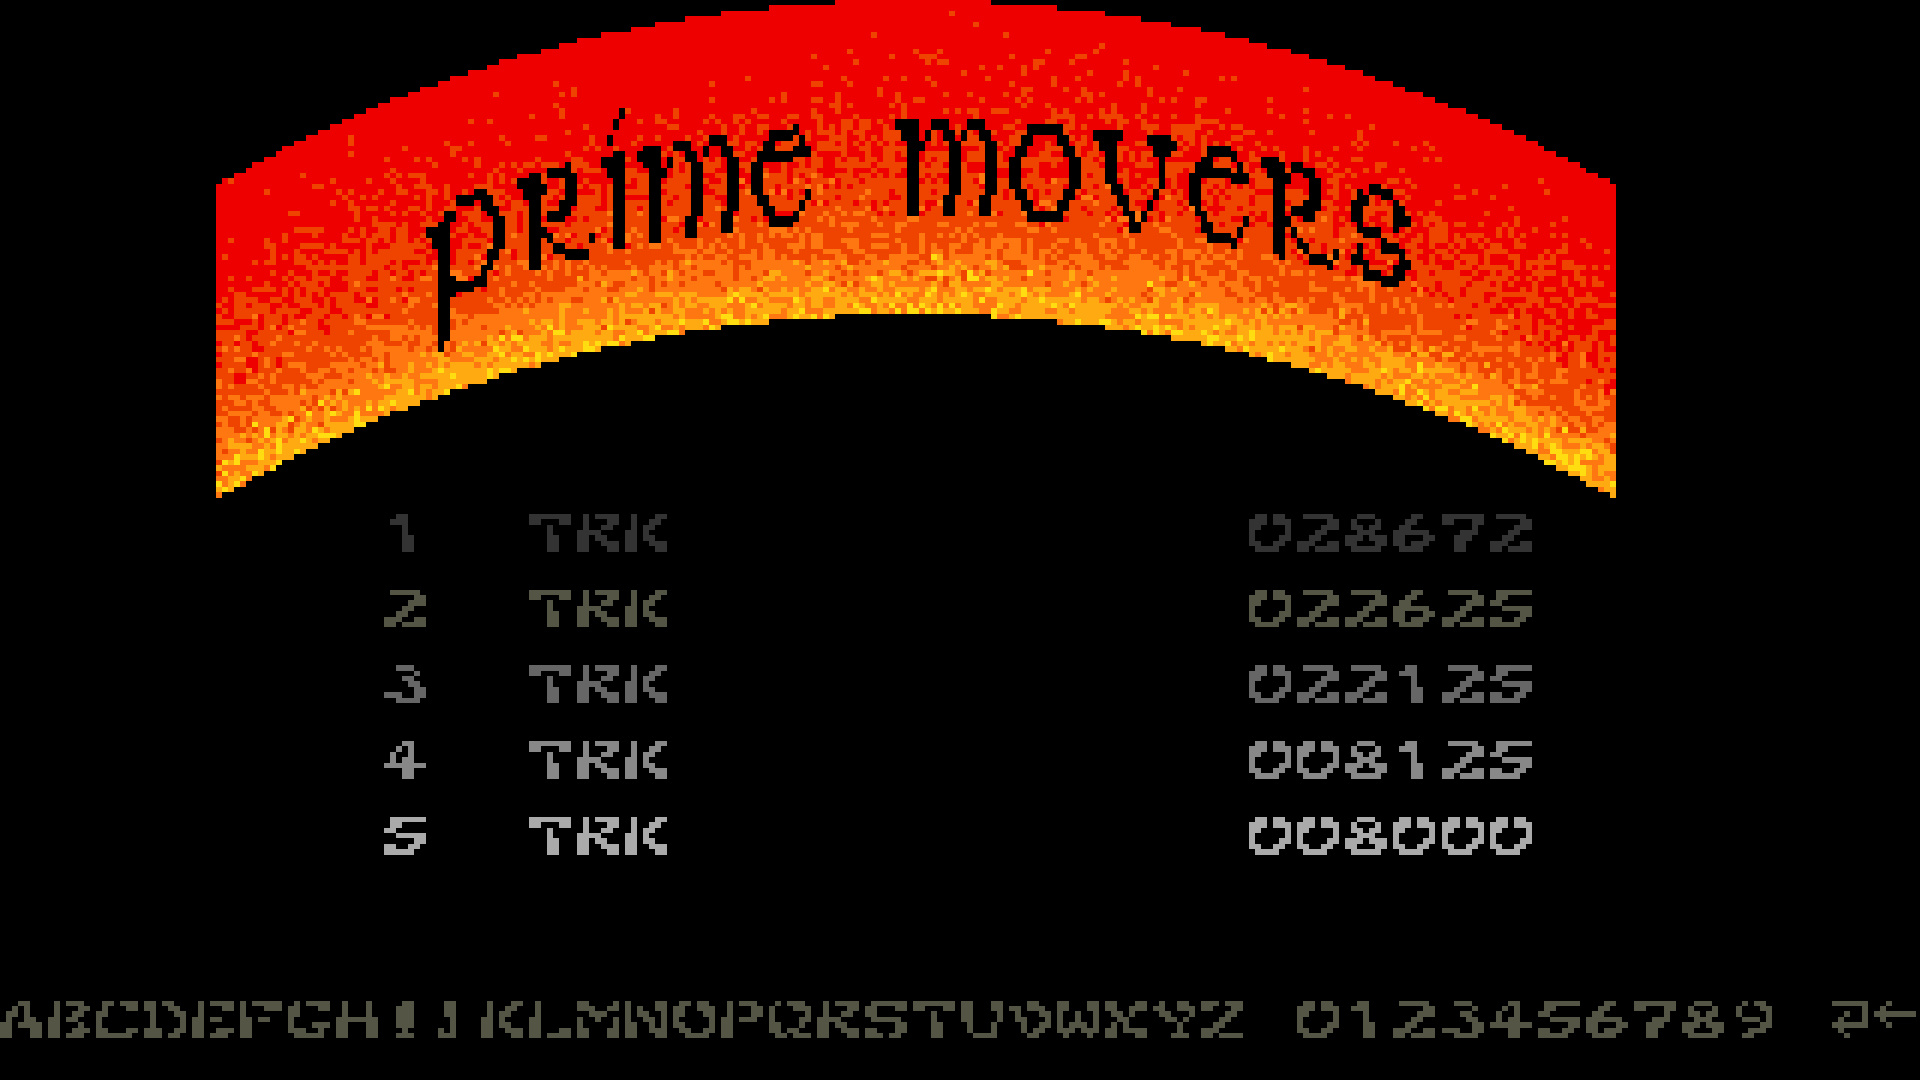 TheTrickster: Army Moves (Amiga Emulated) 28,672 points on 2015-07-22 06:37:11